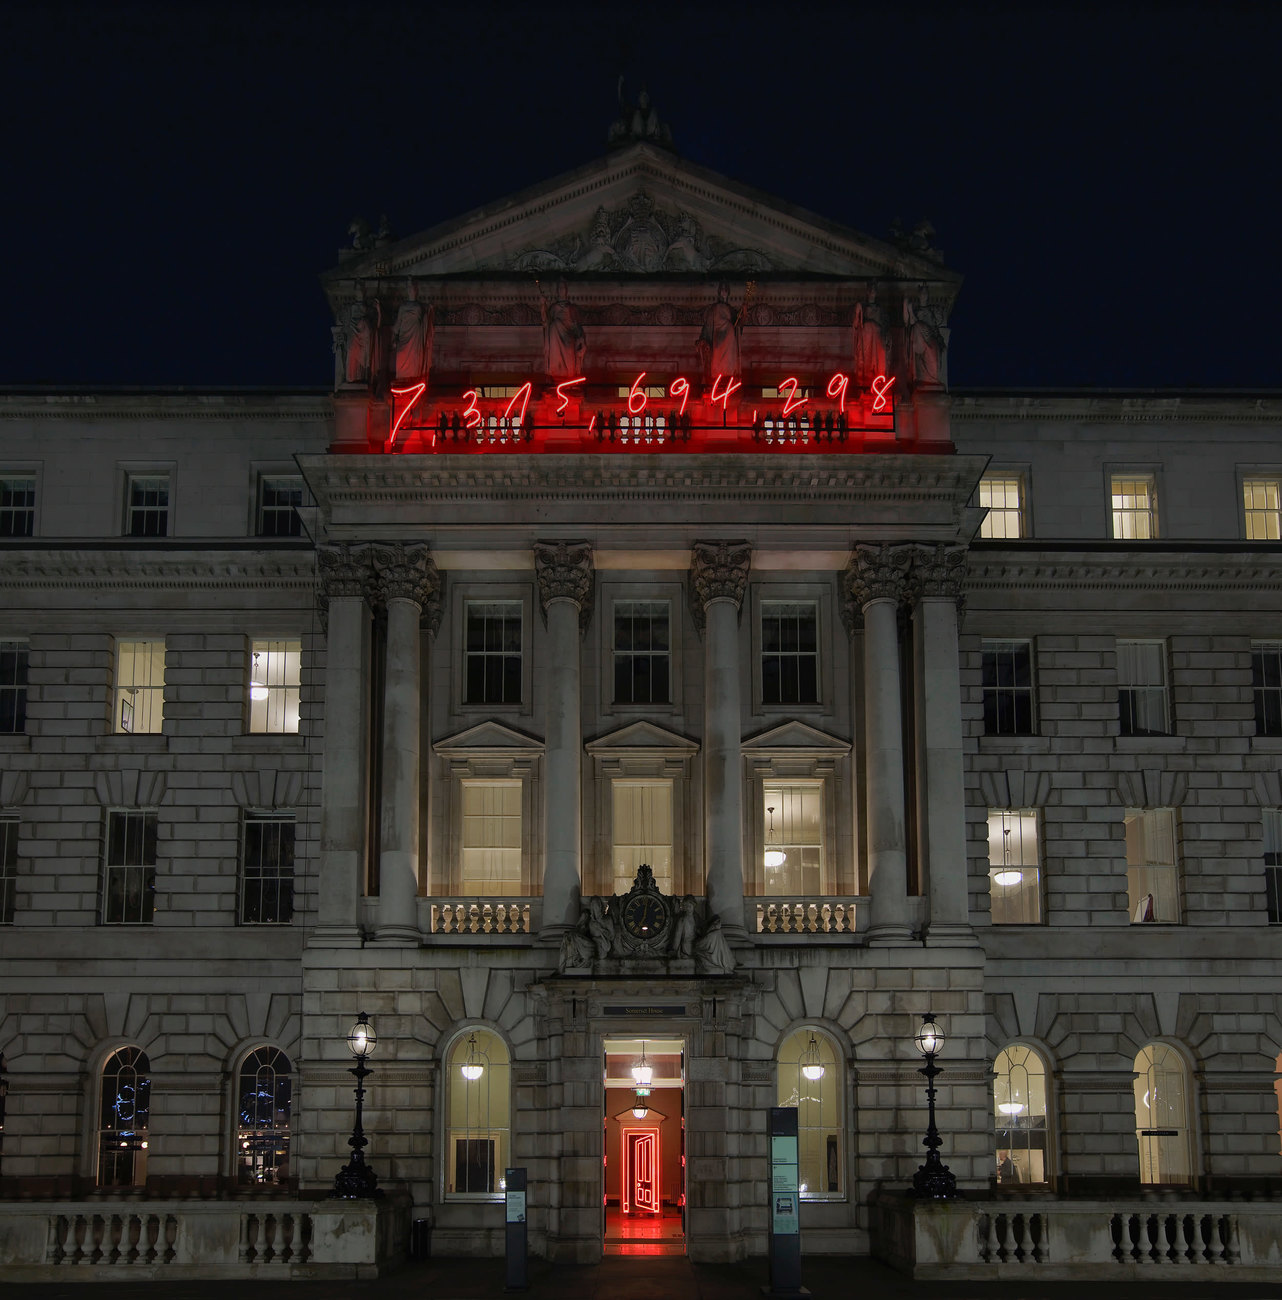 The facade of Somerset House with a large red neon sign displaying the number 7,315,694,298 - the estimated population of the world at 6pm of Tuesday 17 March 2015